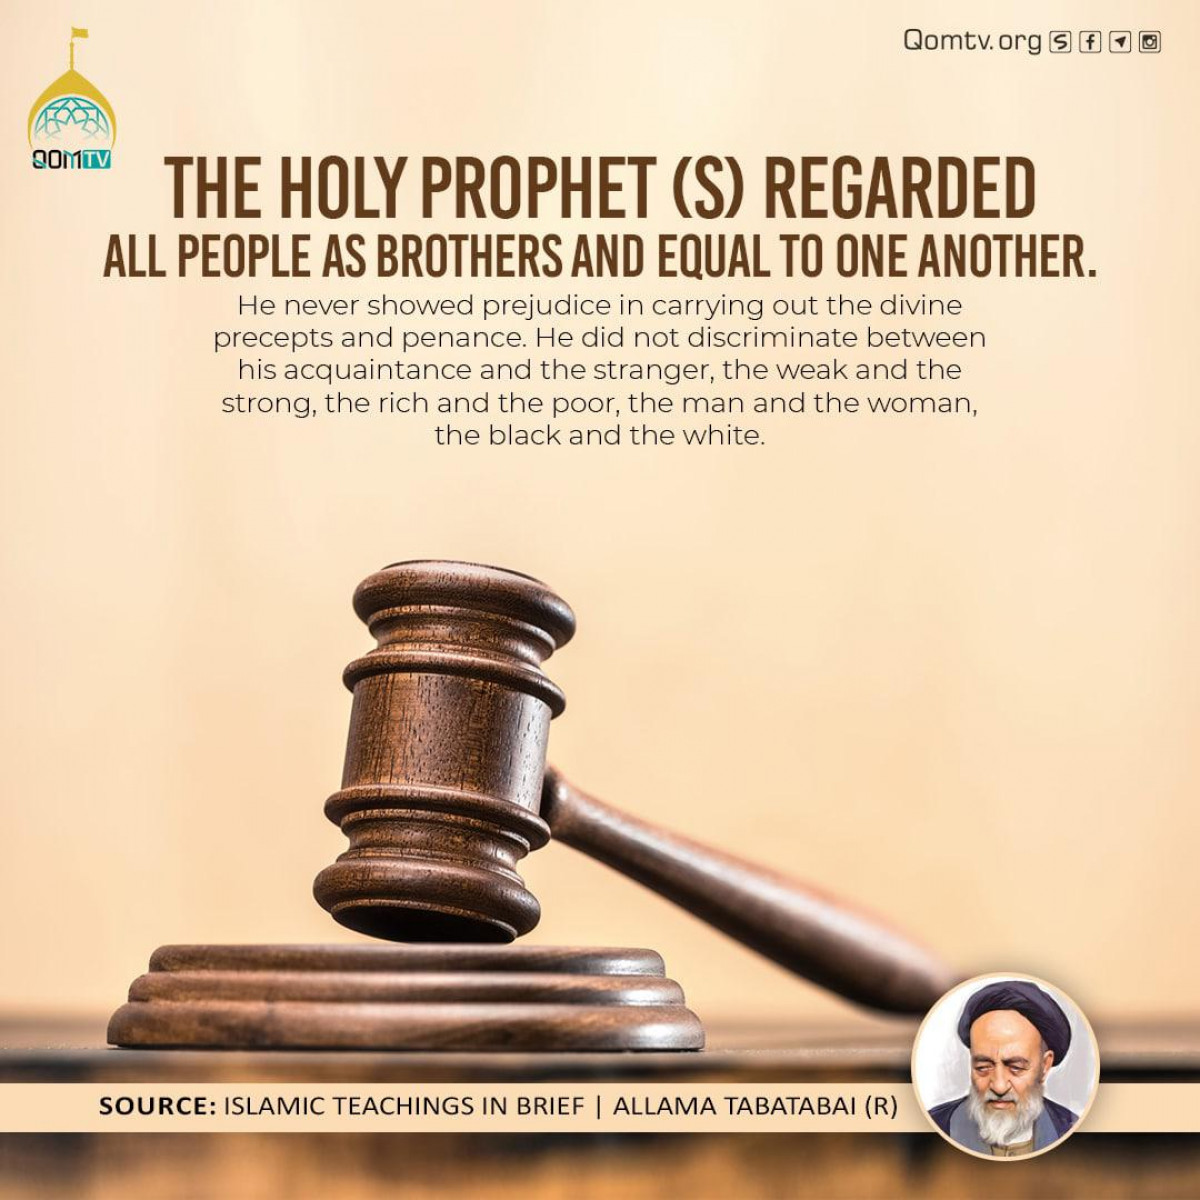 The Holy Prophet (S) regarded all people as brothers and equal to one another